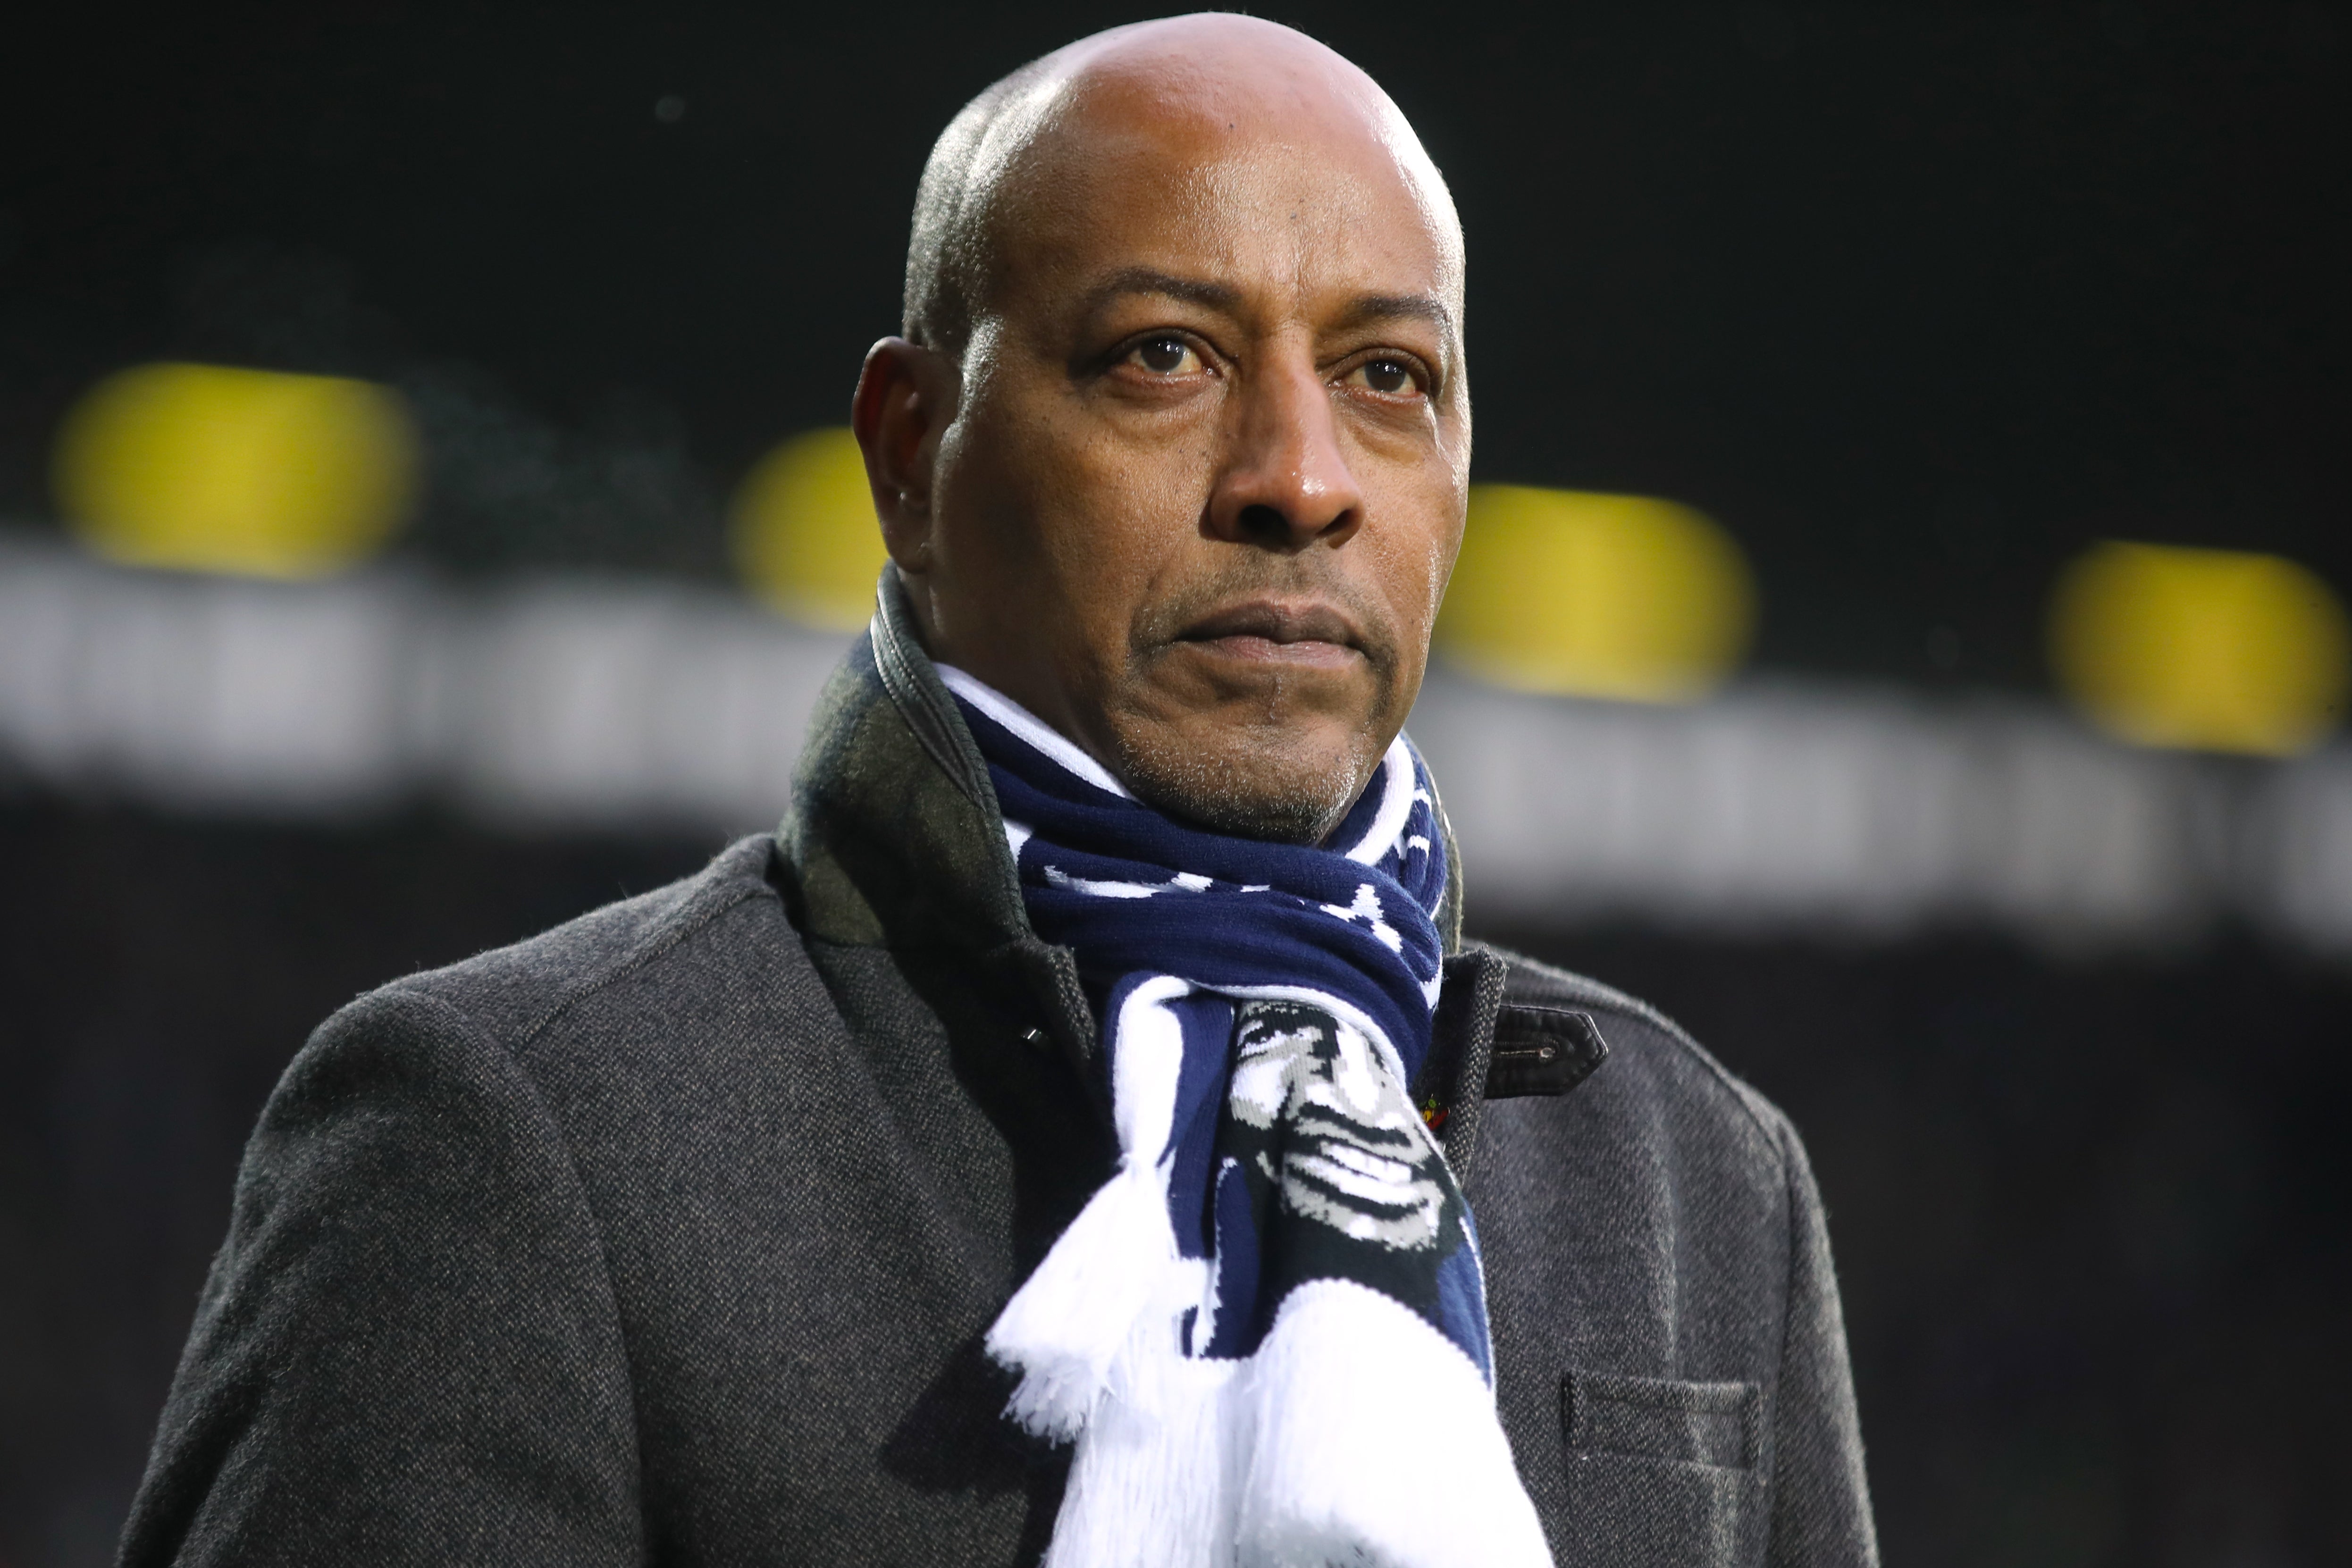 Brendon Batson, who later played for West Brom, made his Arsenal debut in 1972 (Nick Potts/PA)